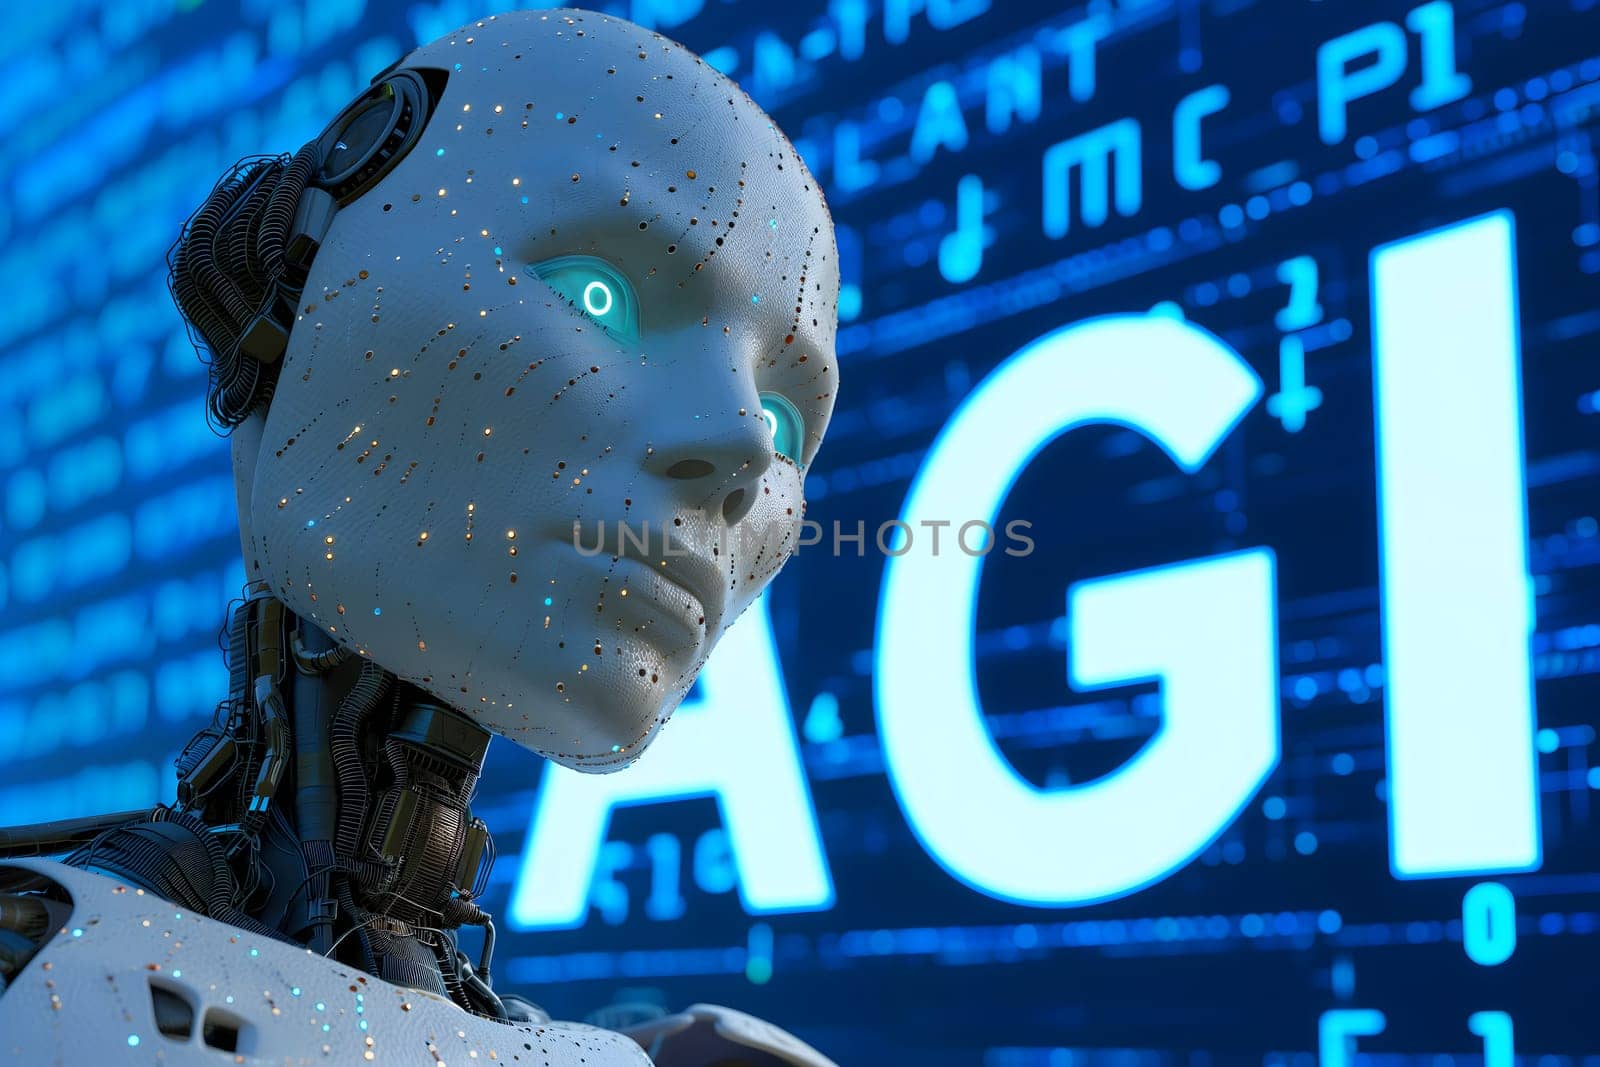 Android head on abstract cybernetic data background with word AGI for Artificial General Intelligence. Neural network generated image. Not based on any actual person or scene.